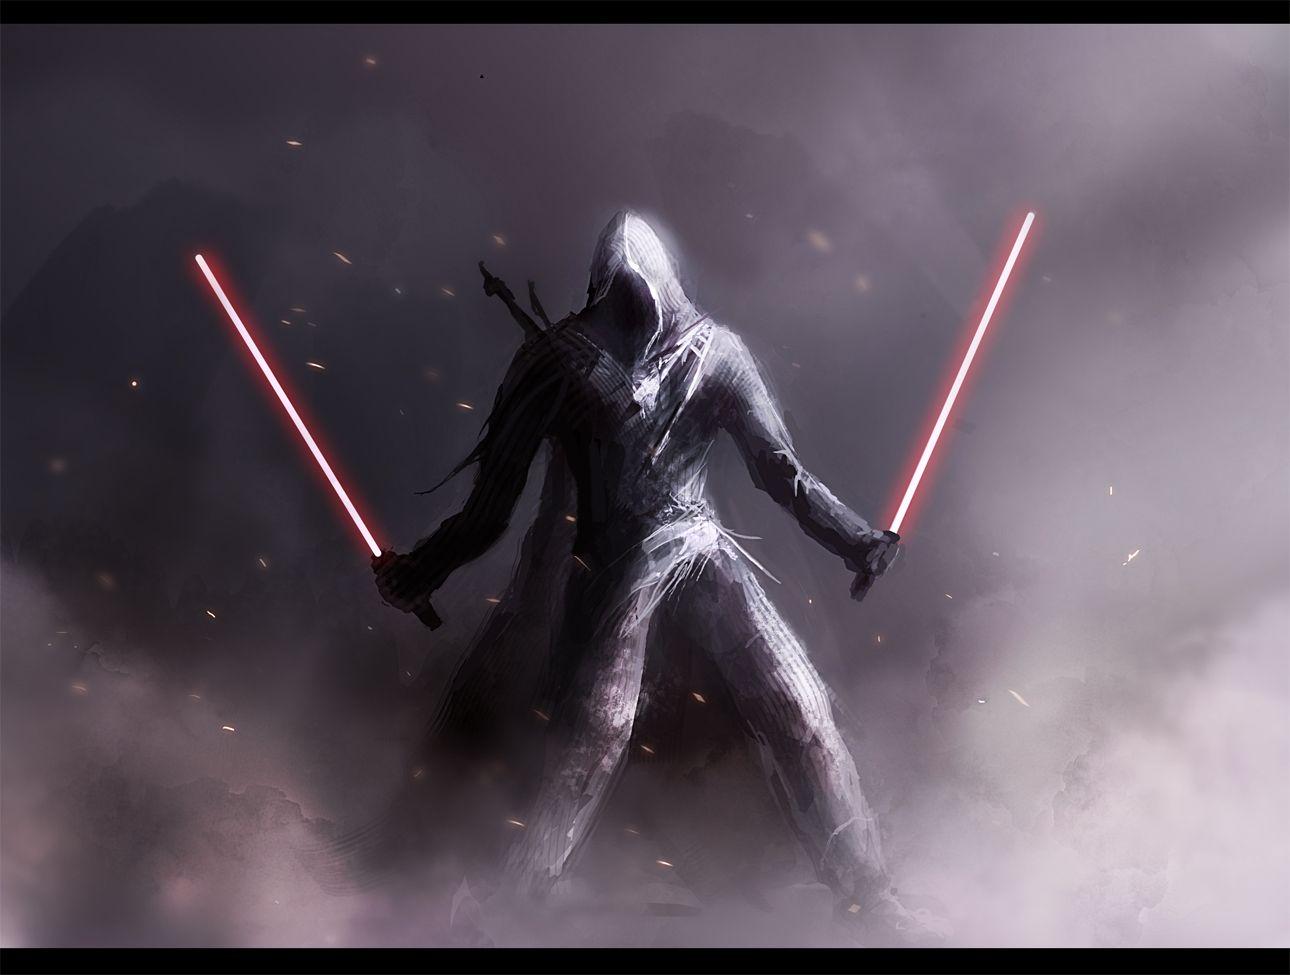 Another Sith by